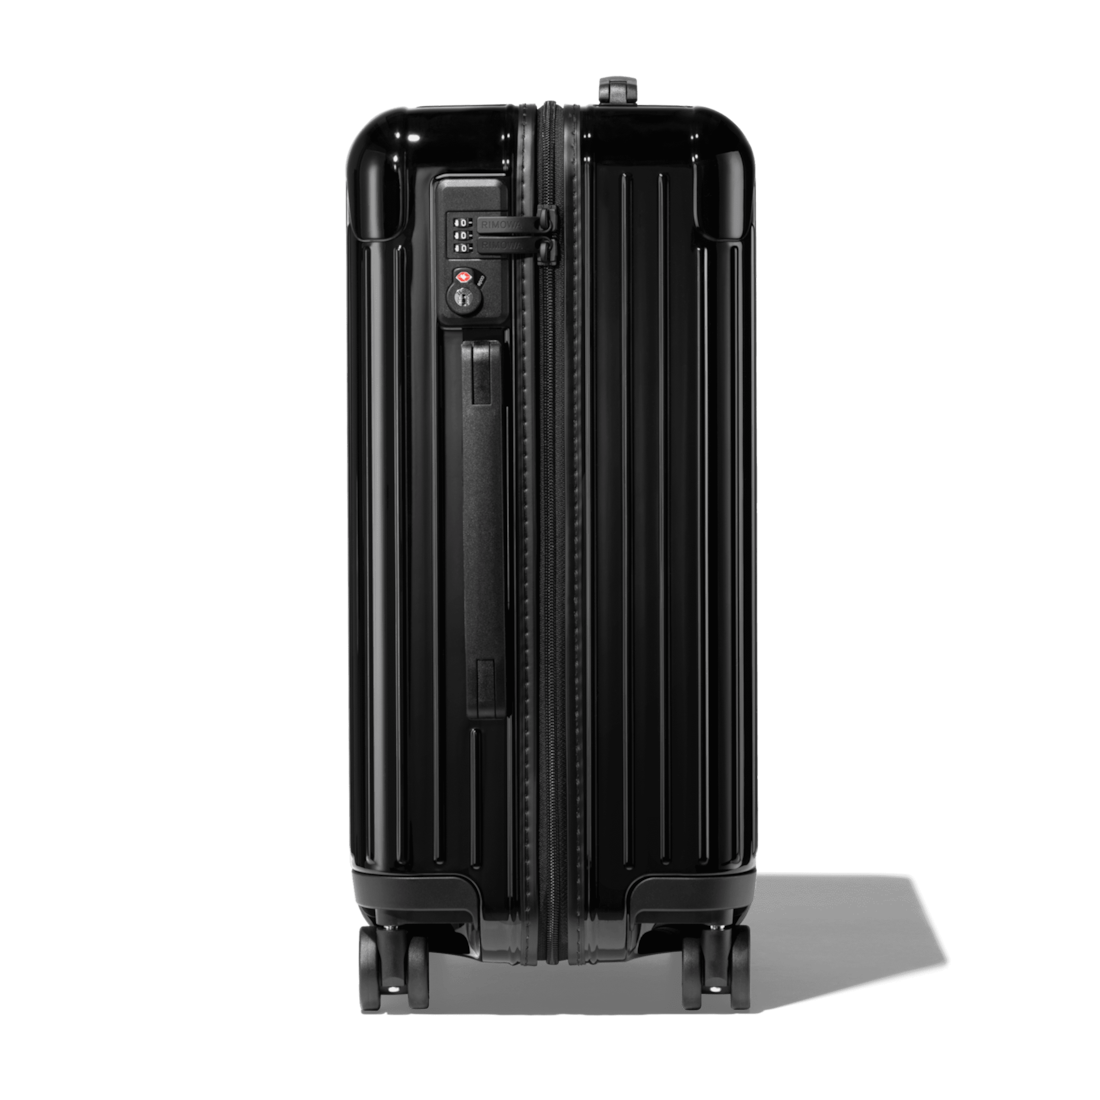 Essential Cabin Lightweight Carry-On Suitcase | Black Gloss | RIMOWA